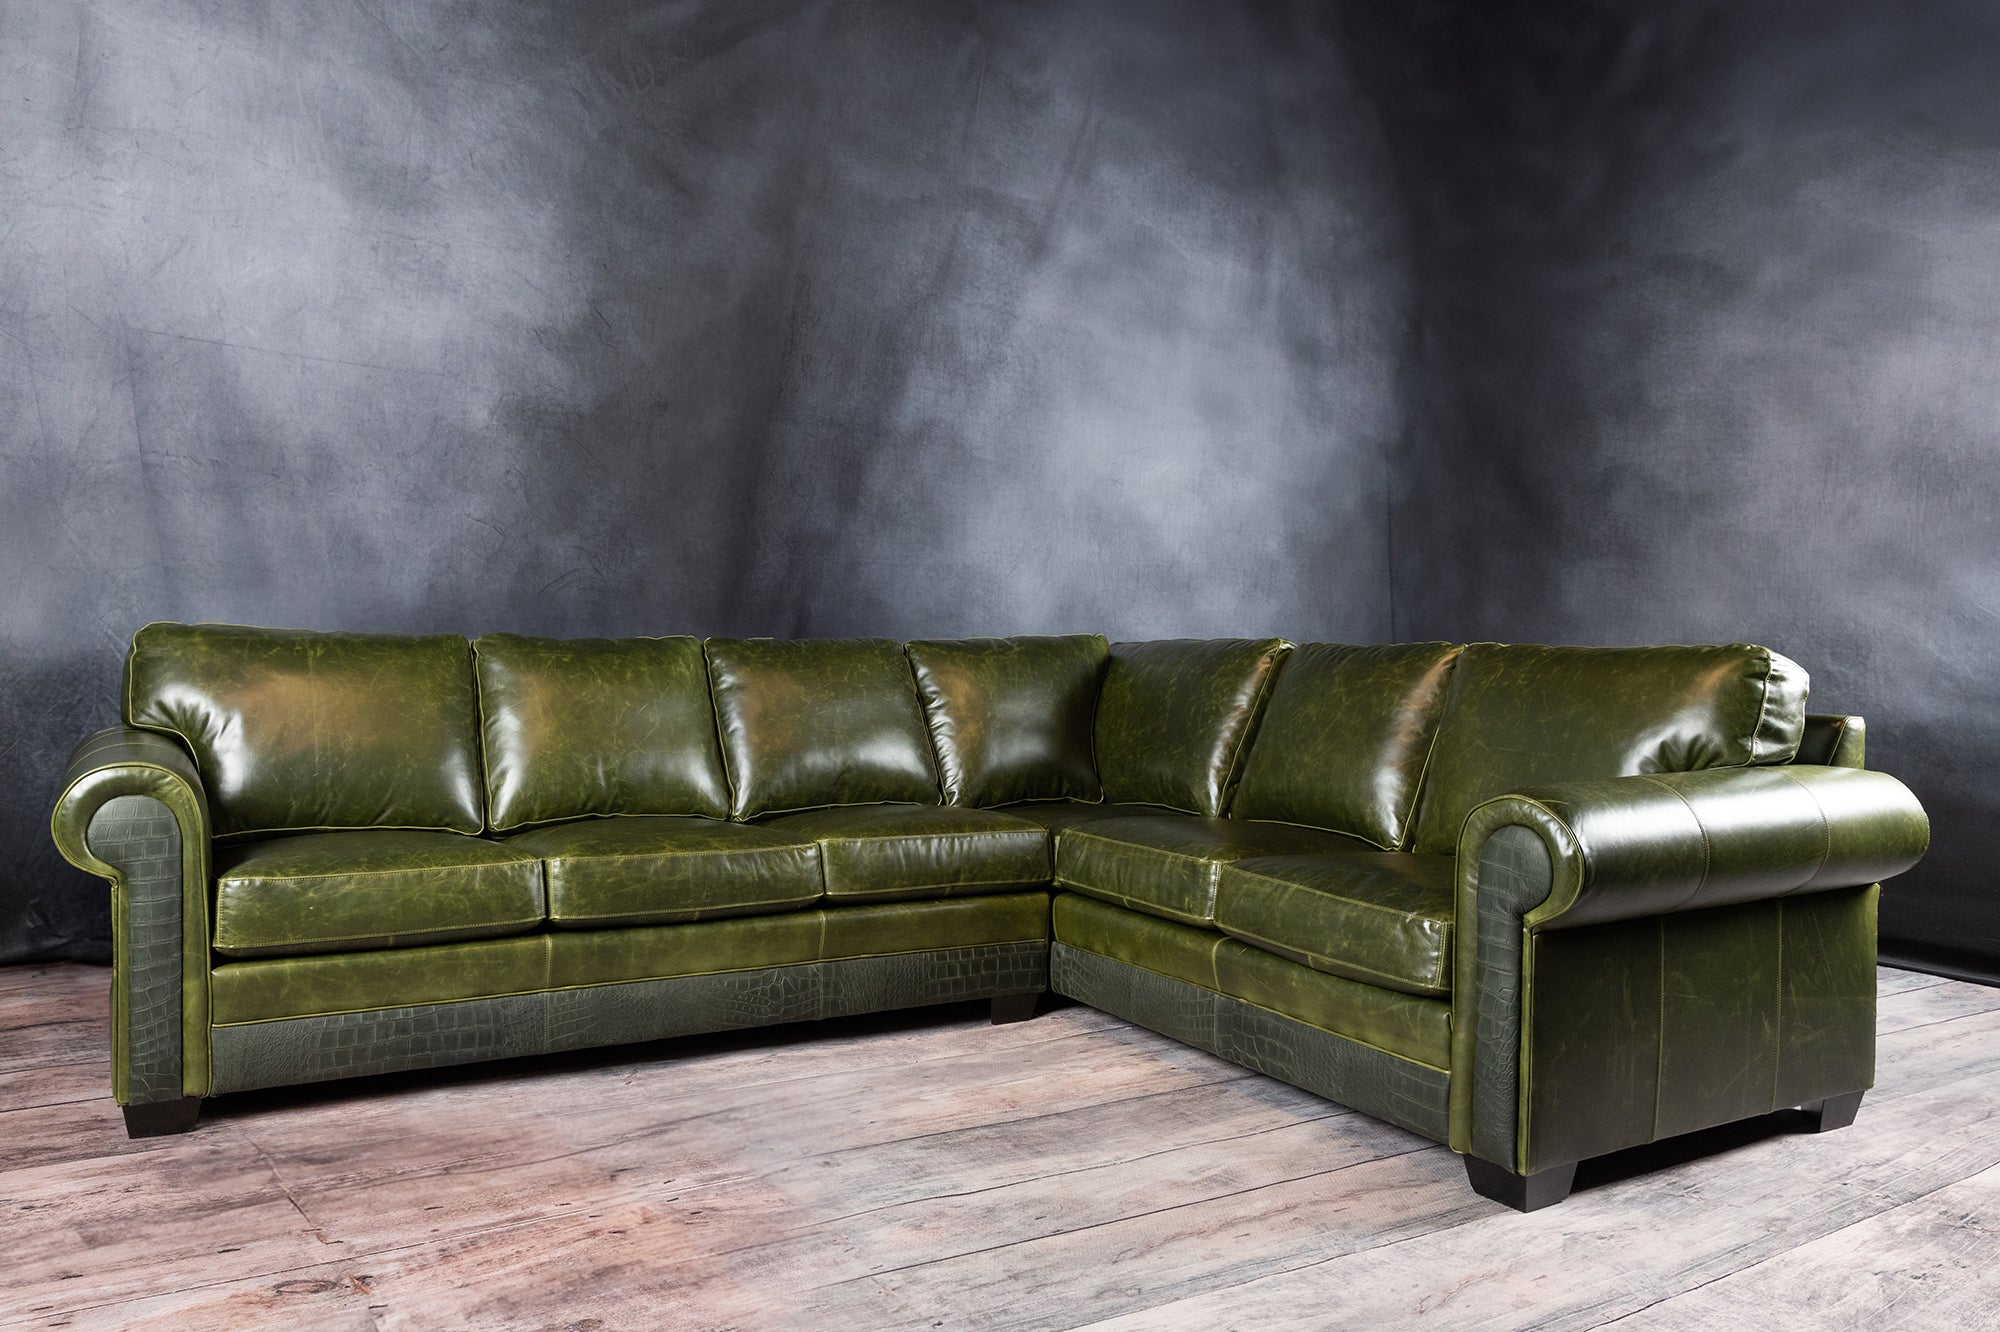 leather sectional